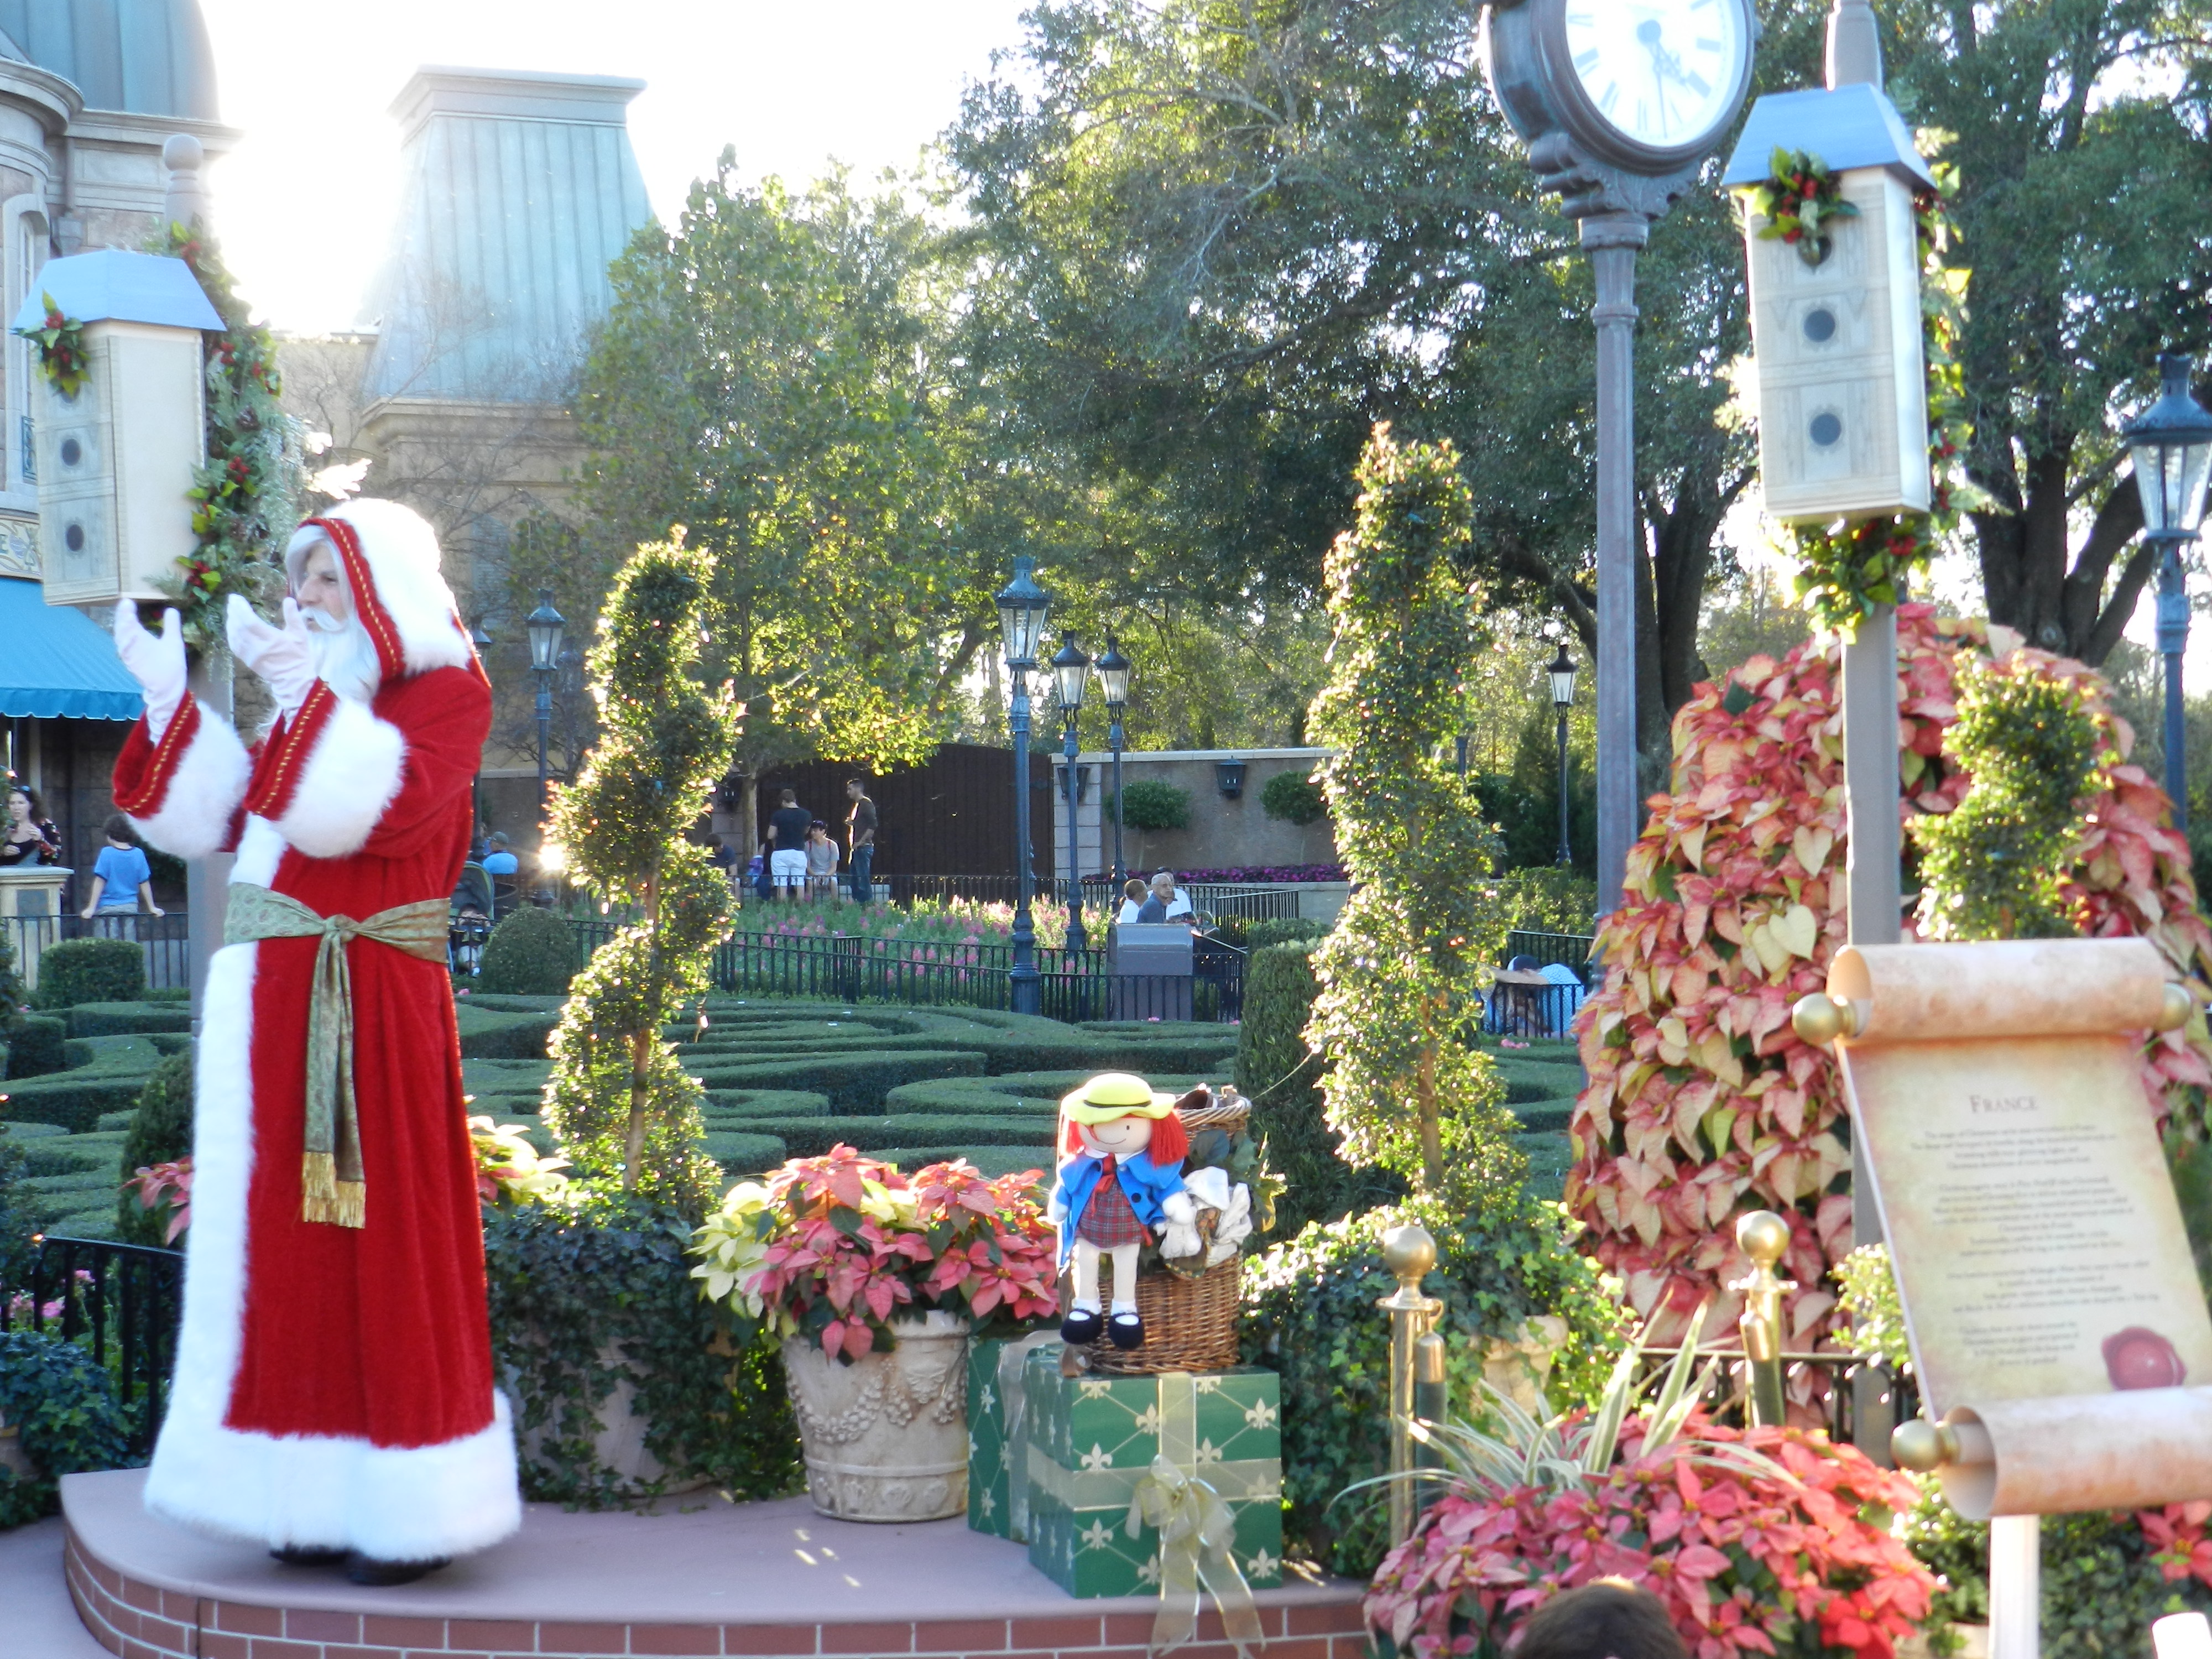 Epcot Festival of the Holidays with Pere Noel in France giving story. Disney Epcot at Christmas.